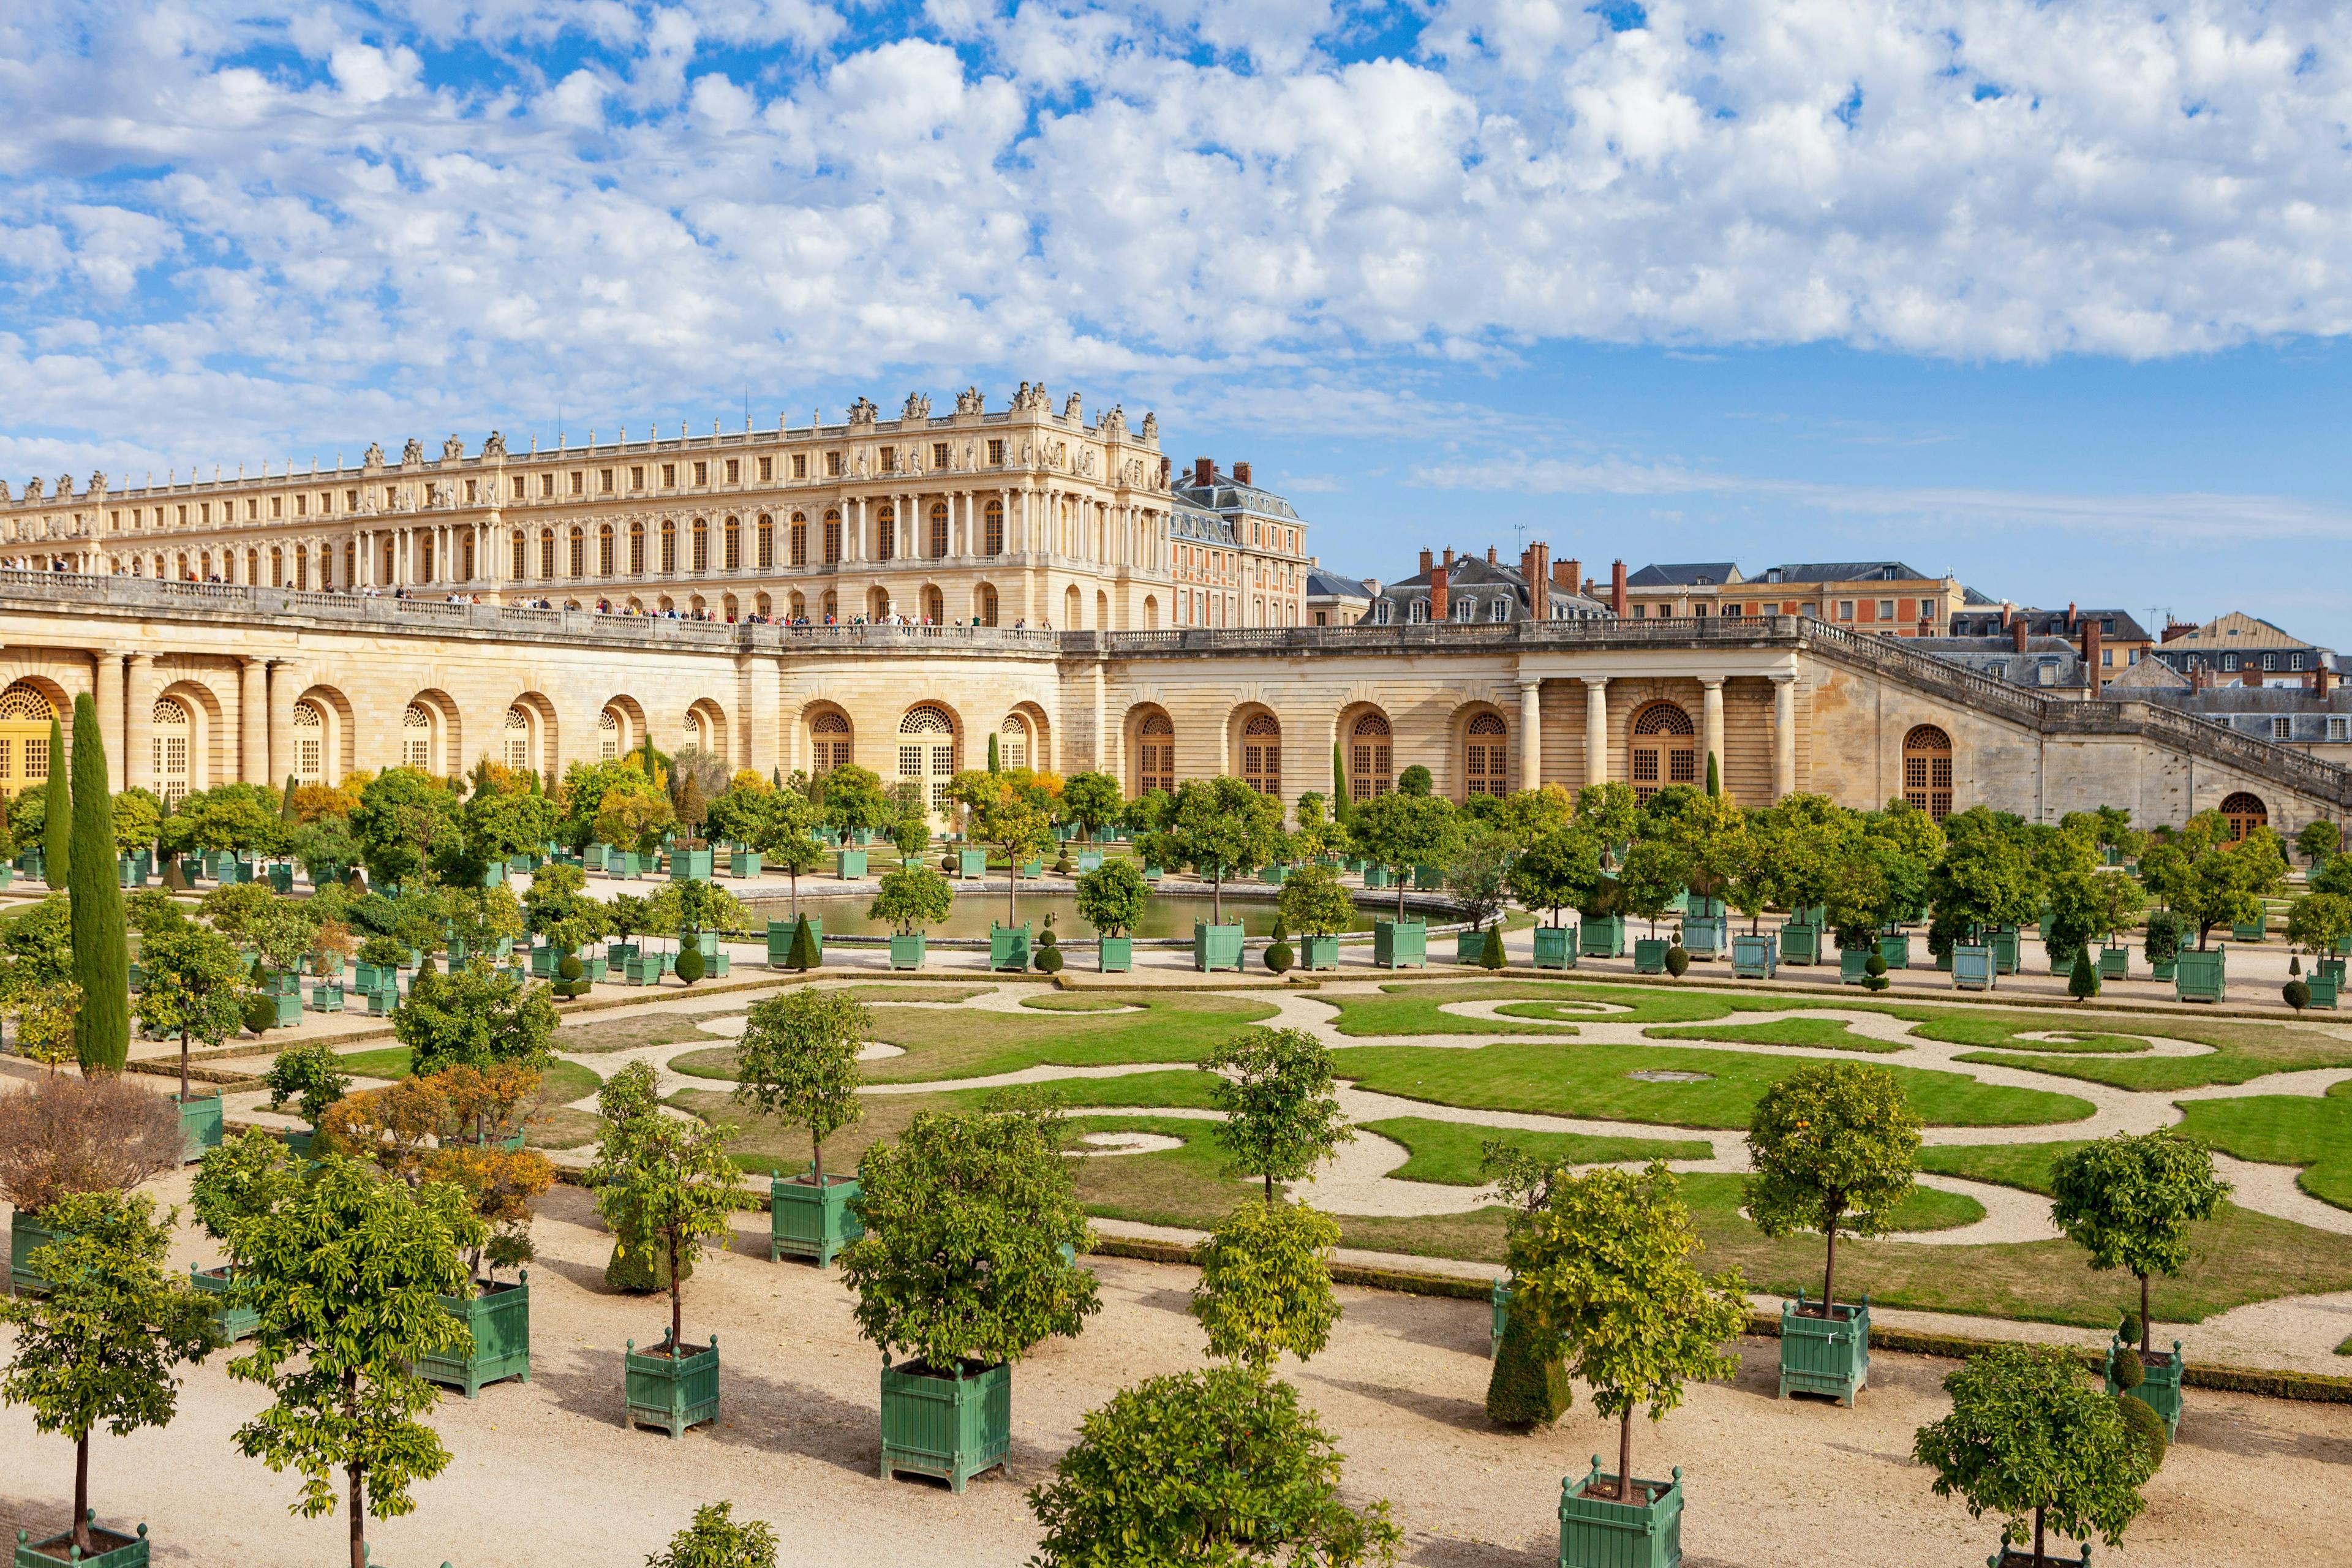 The palace of Versailles.&nbsp;